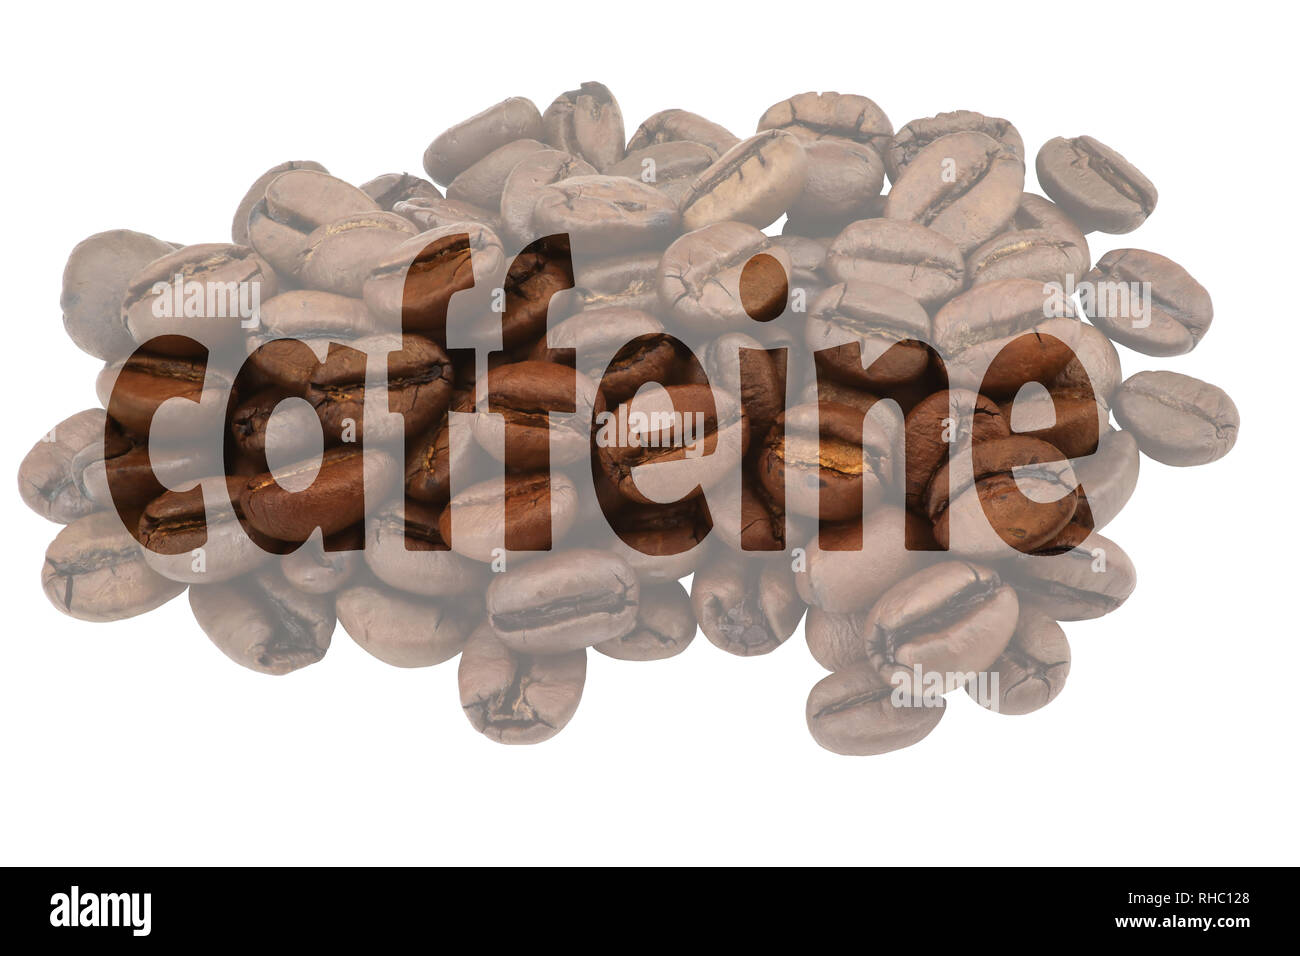 Caffeine with image of coffee beans and highlighted text Caffeine Stock Photo